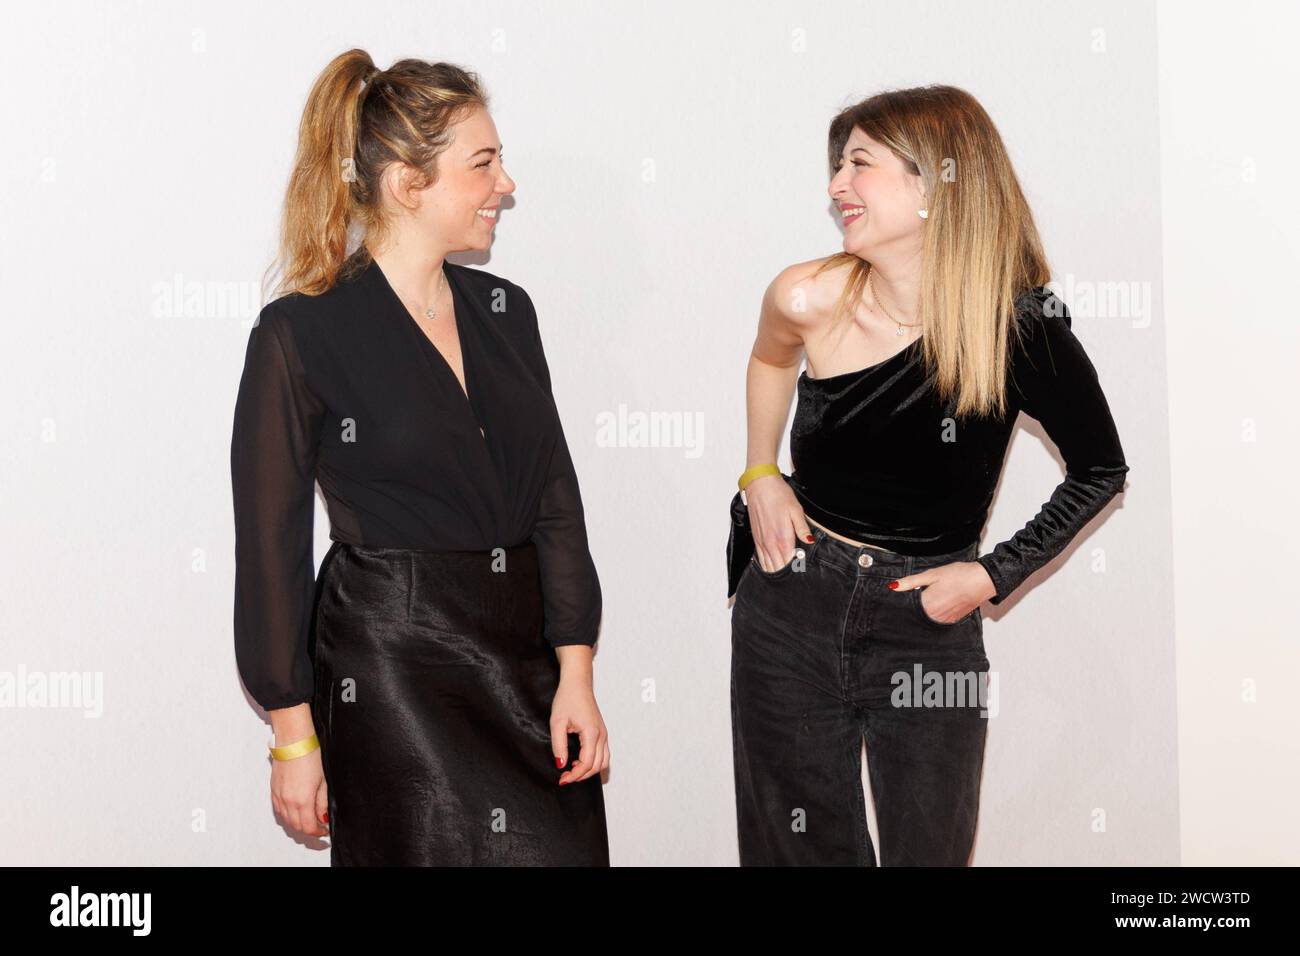 News - Photocall Movie Povere Creature Alice Caccamo and Marta Filippi during the photocall of the movie Povere Creature, 16 january 2024 at Cinema Barberini, Rome, Italy Italy Copyright: xcxEmanuelaxVertolli/SportReporterx/xLiveMediax LPN 1199517 Stock Photo